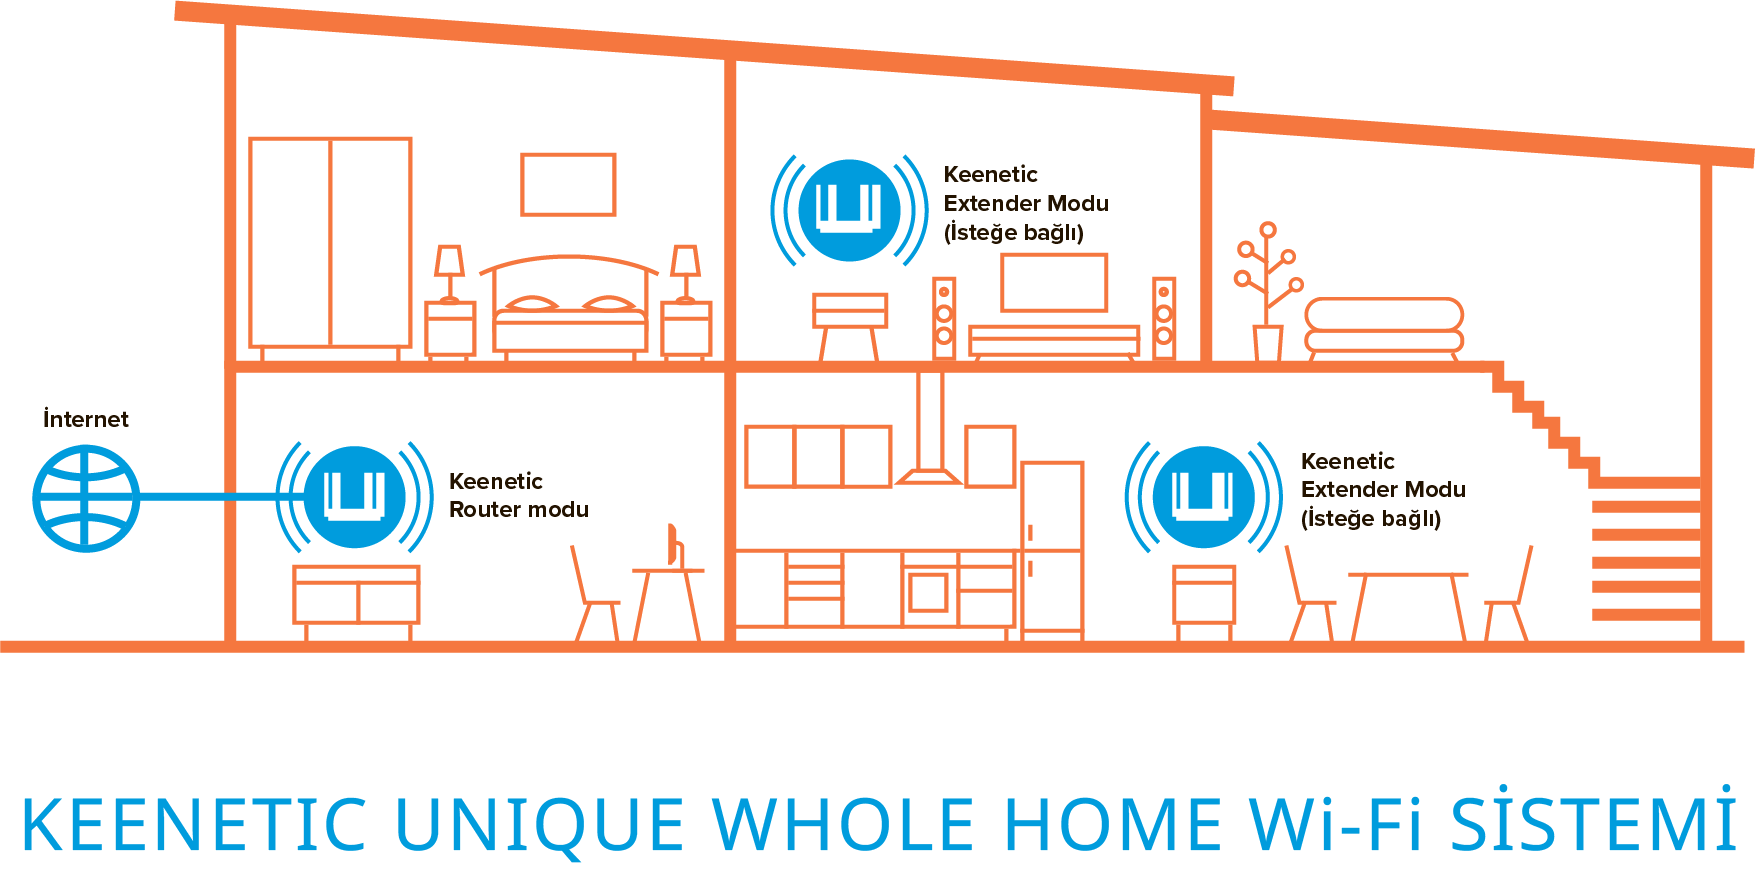 Keenetic Unique Whole Home Wi-Fi